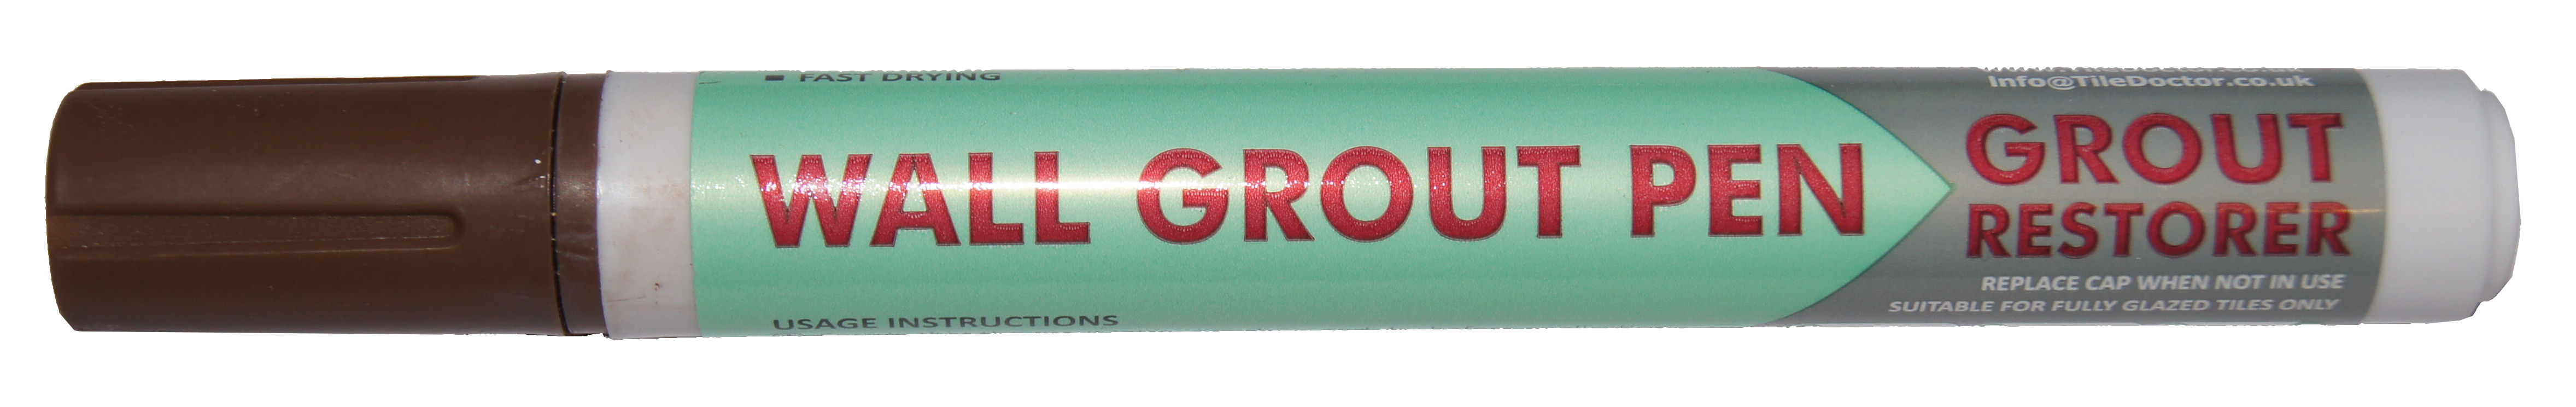 Click here for more information about Grout Pens